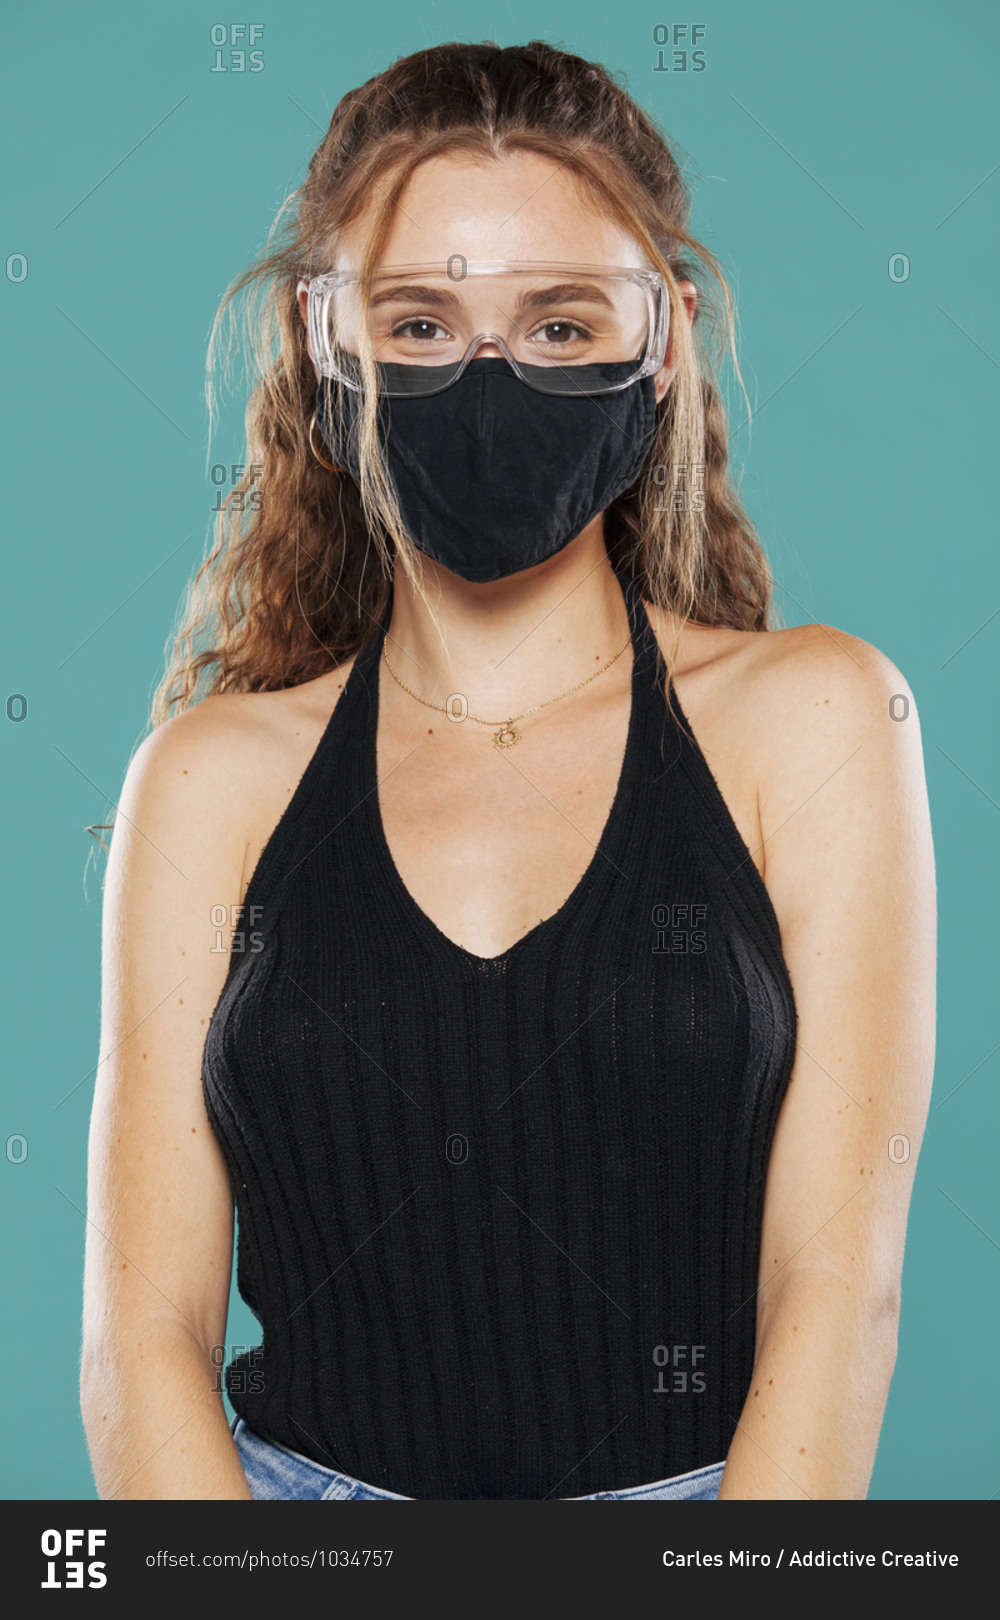 Female wearing medical mask and plastic safety goggles standing on blue background in studio and looking at camera